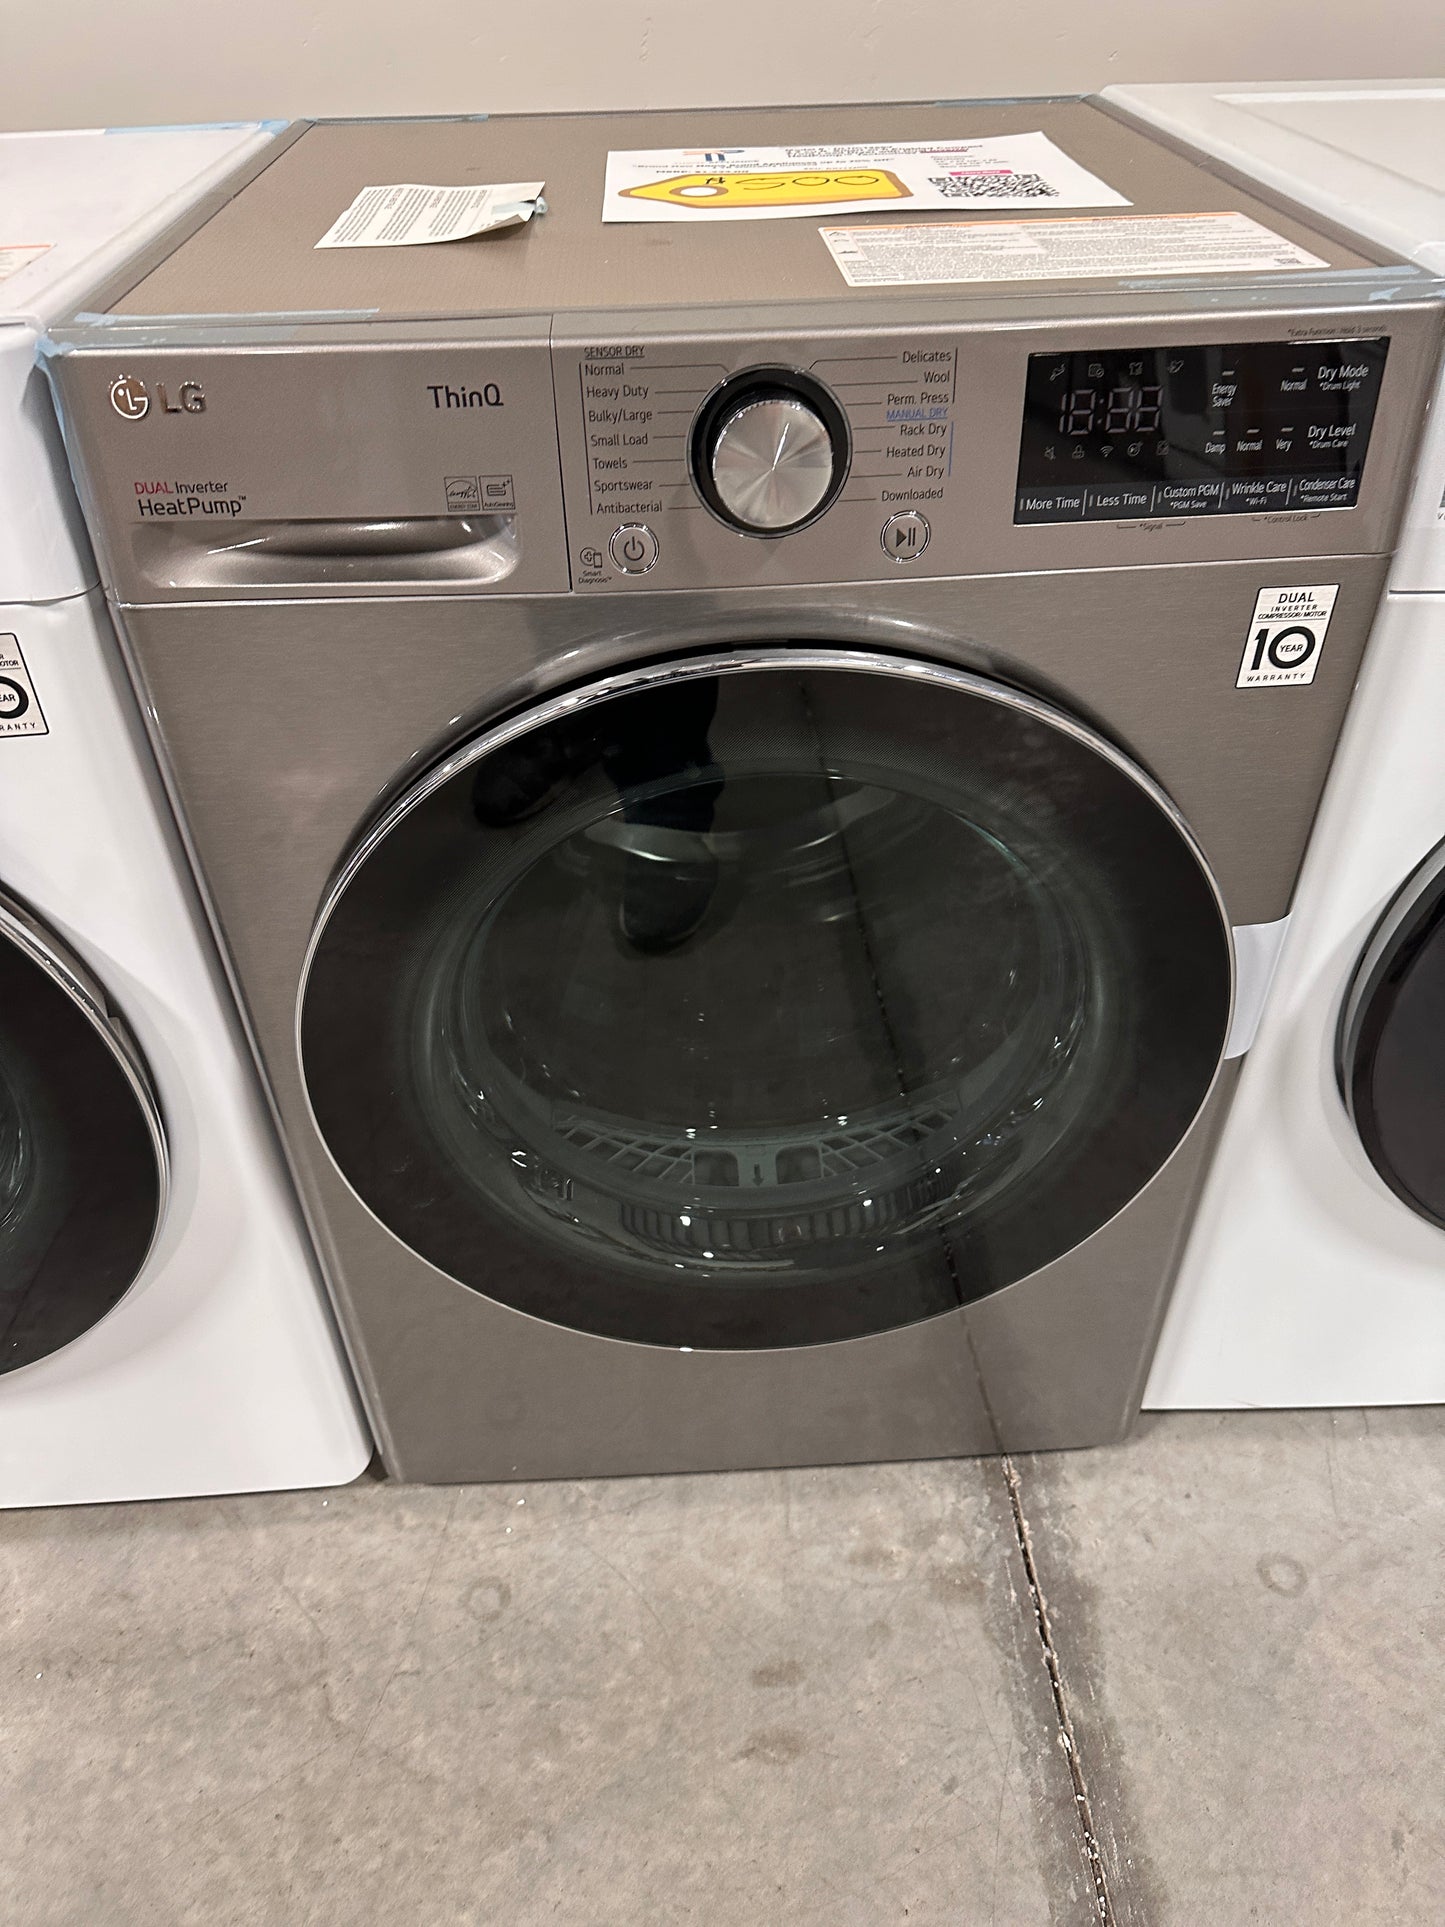 NEW STACKABLE SMART ELECTRIC DRYER - DRY12200 DLHC1455V